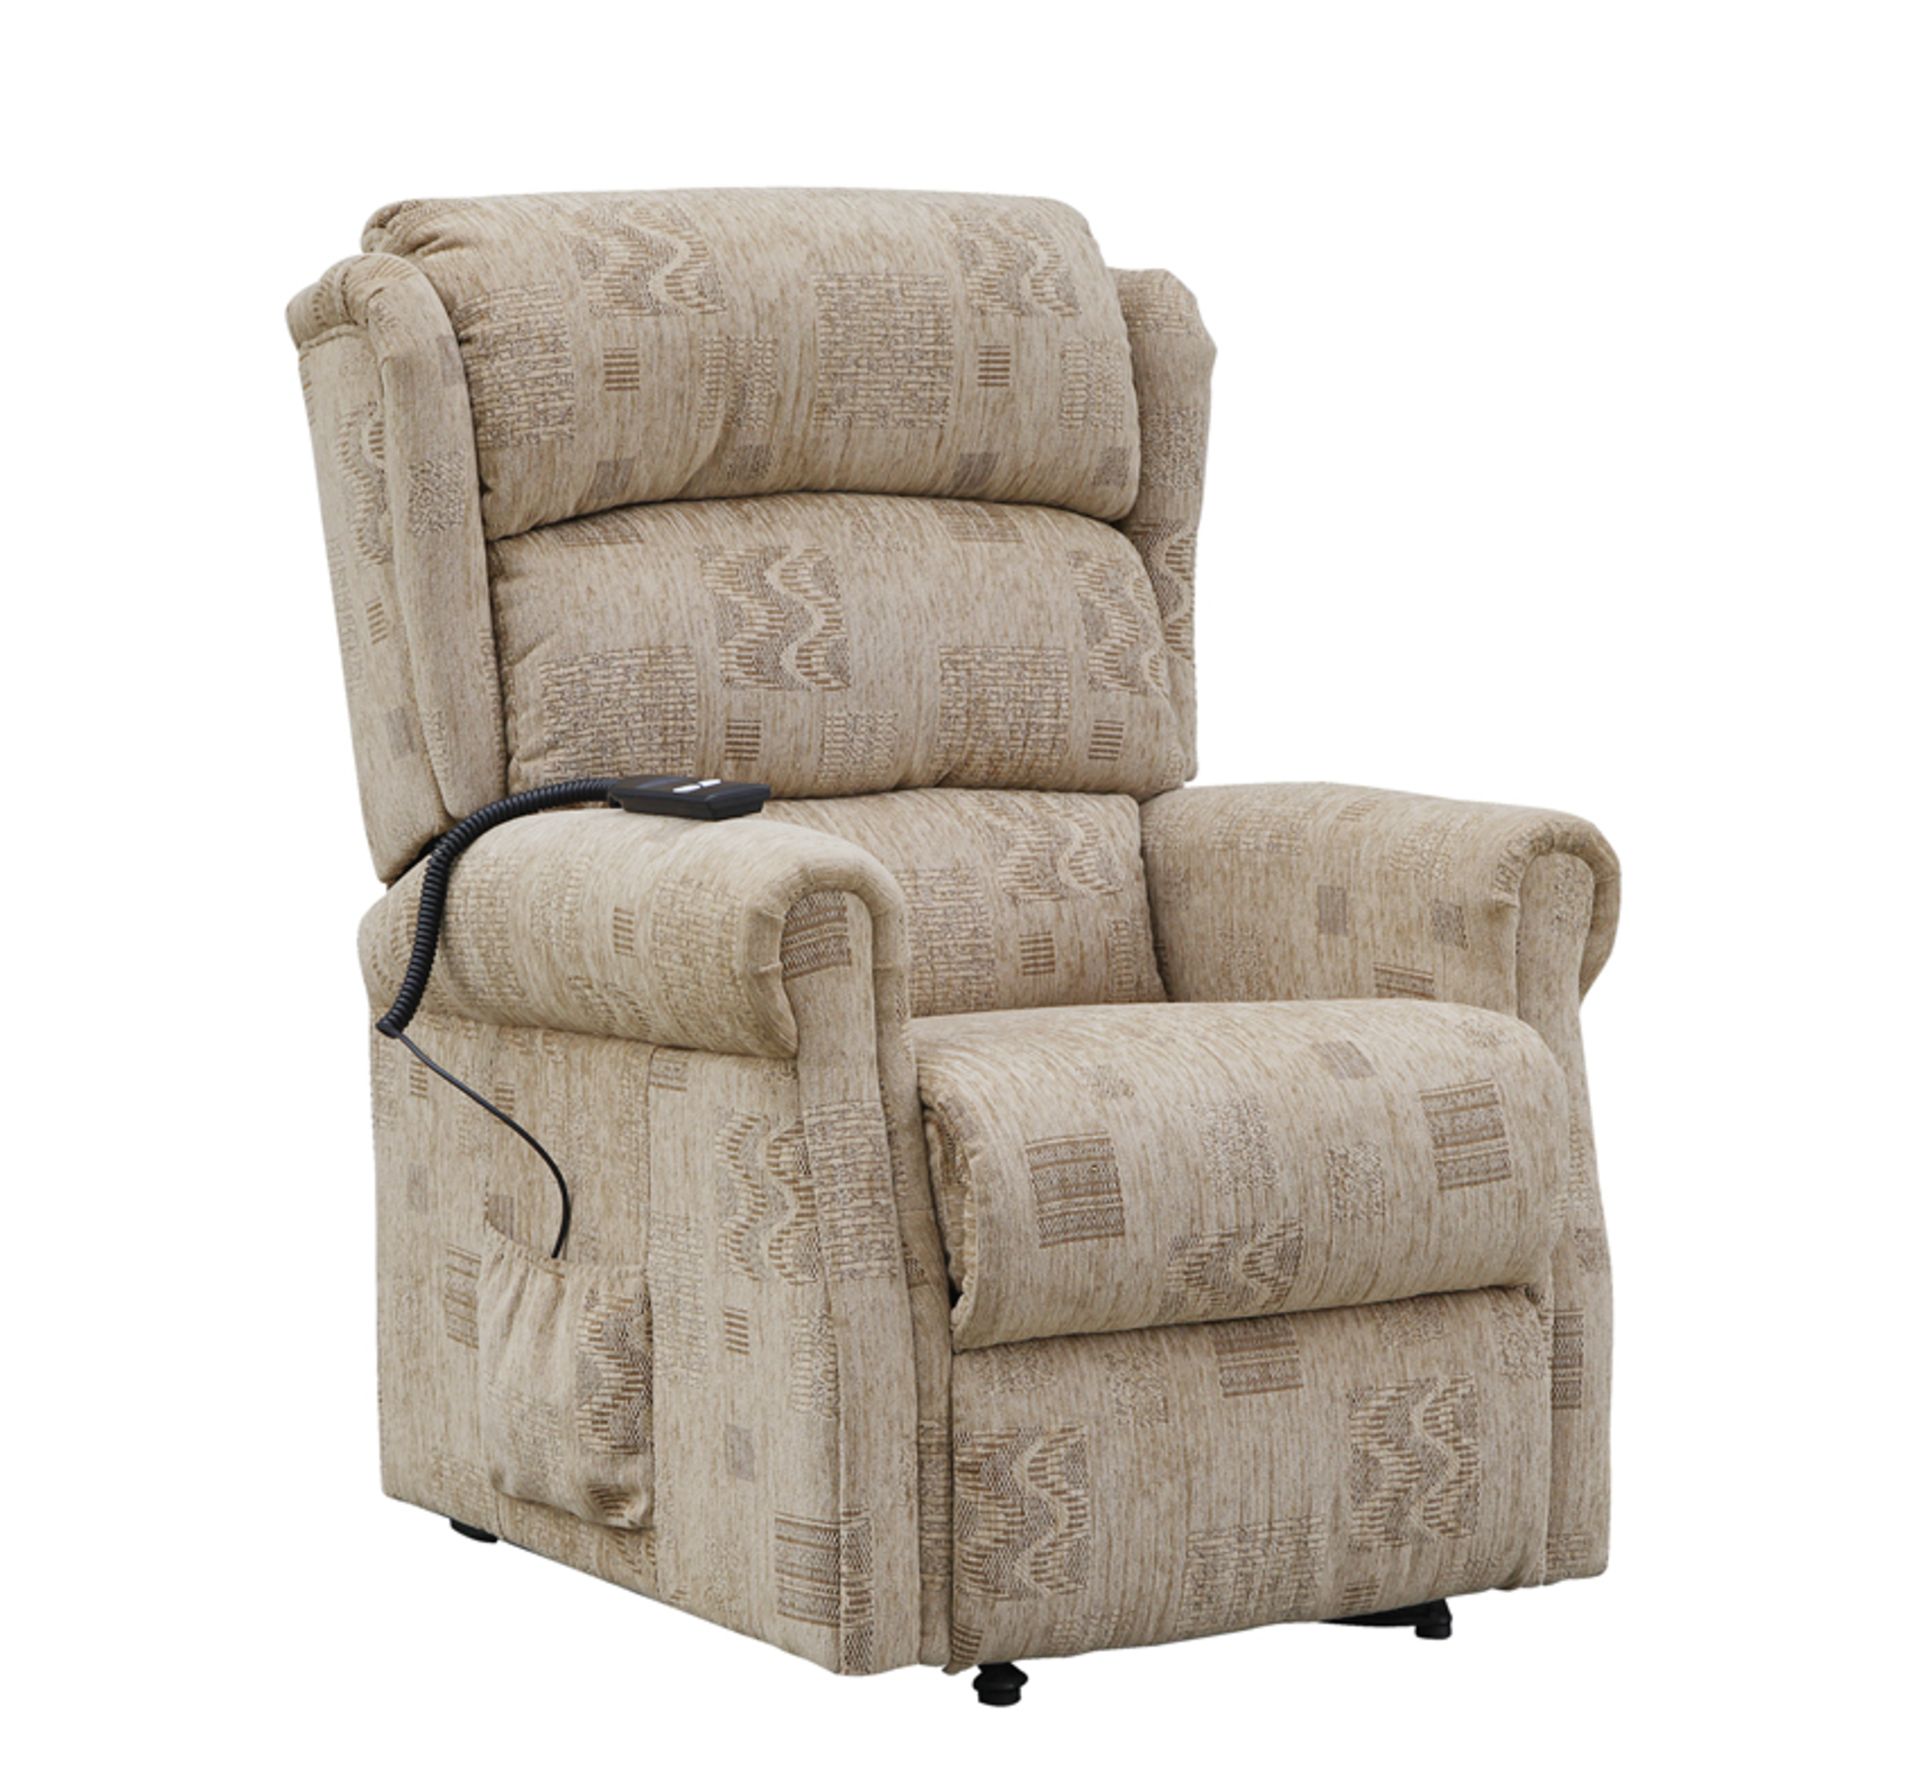 Brand New Boxed Cambridge Fabric Electric Rise And Recliner Chair In Soho Patchwork Oatmealæ